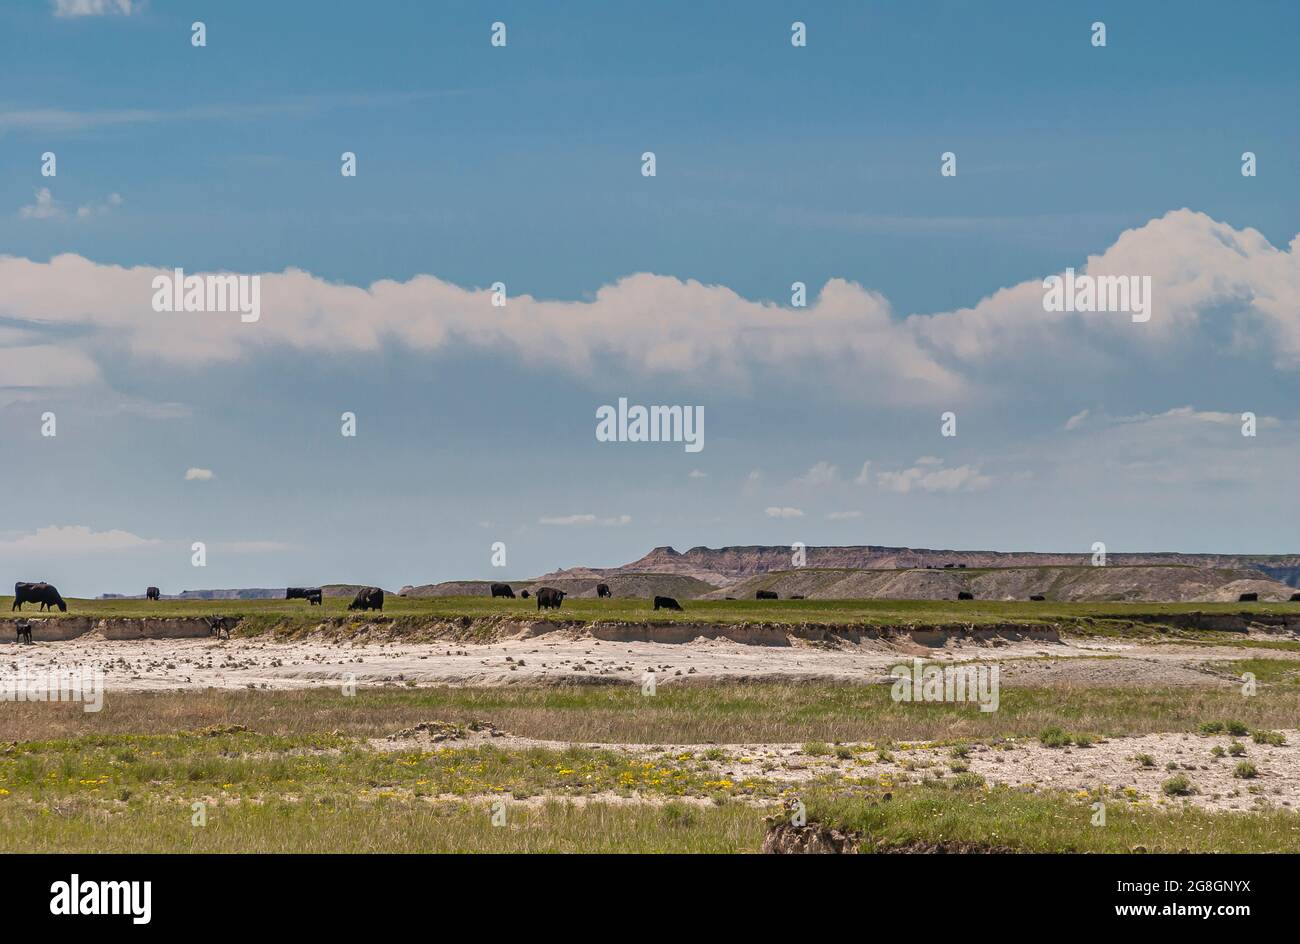 Badlands National Park, SD, USA - June 1, 2008: Black cattle grazing on green prairie under blue cloudscape with white geologic deposits exposed. Stock Photo